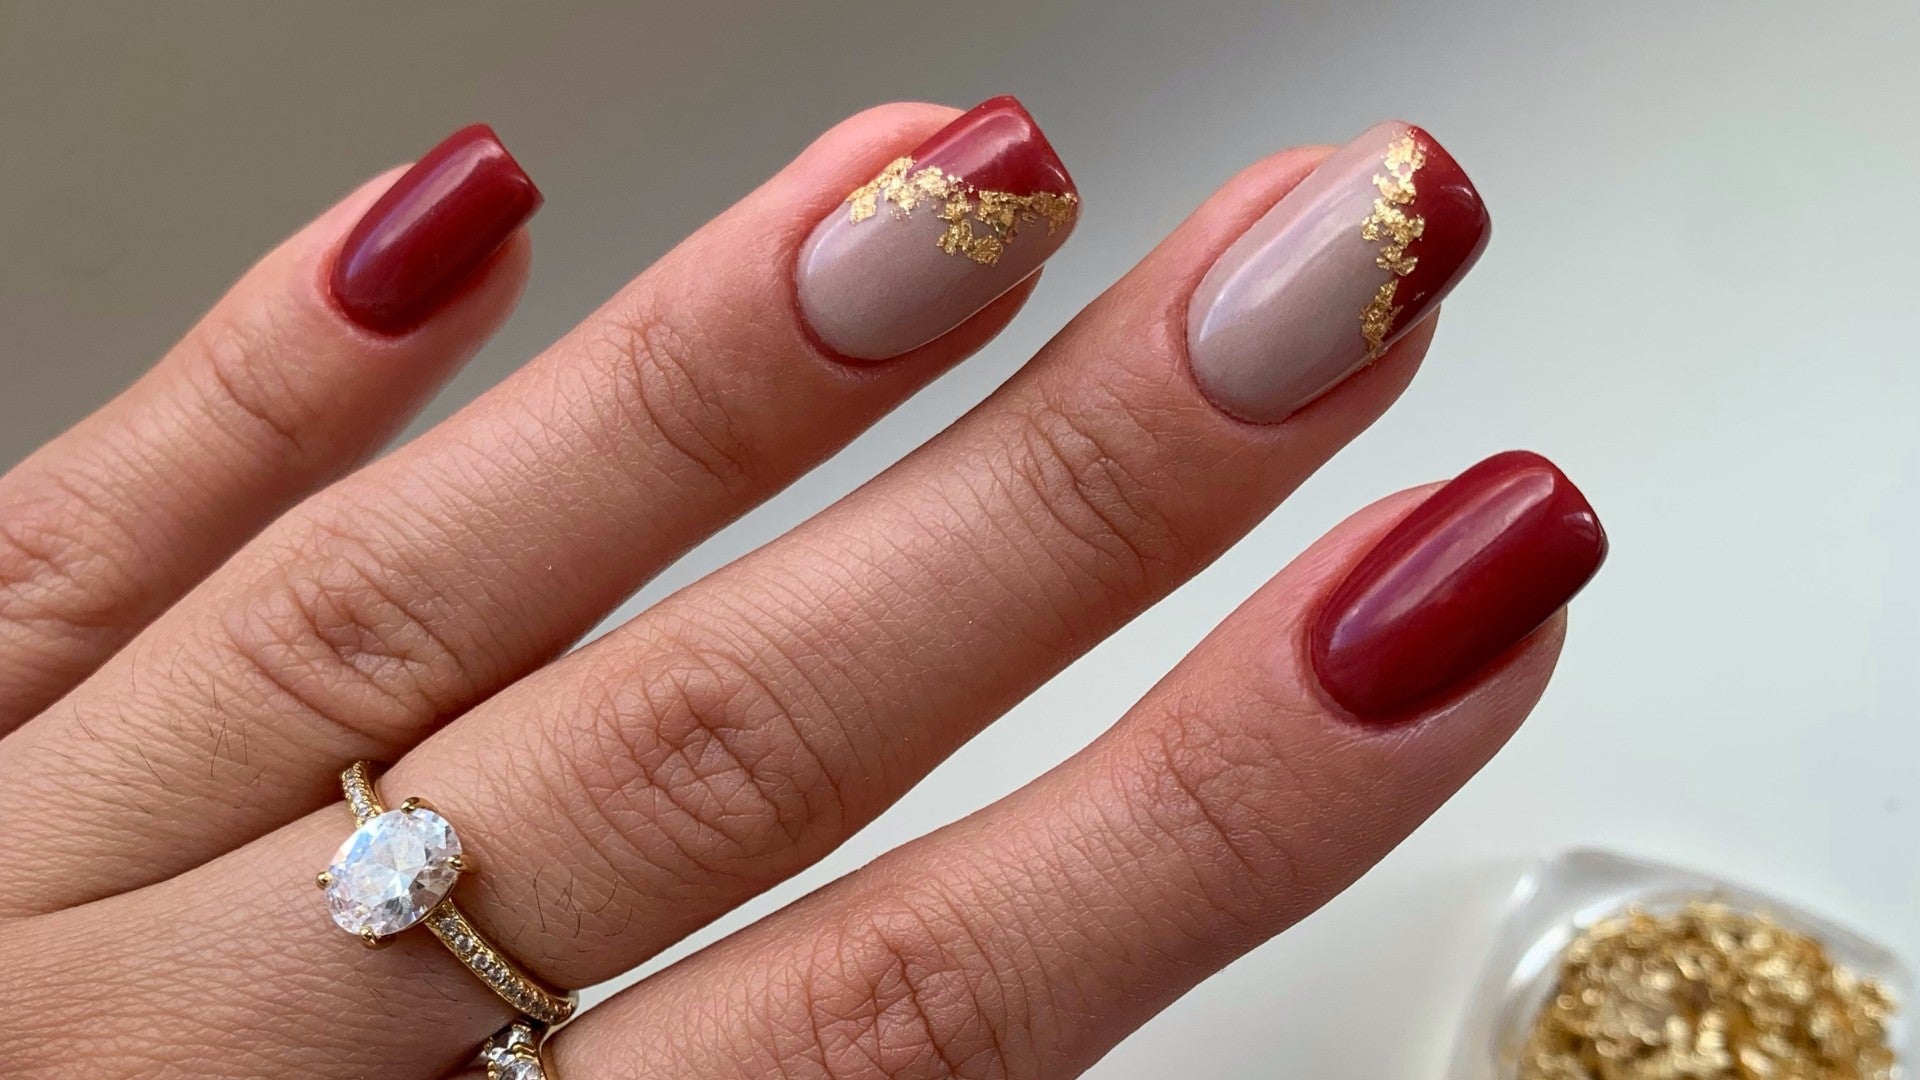 Skeleton Leaf Manicures: Embedded Nail Art Uses Dried Flowers, Crushed  Shells and More